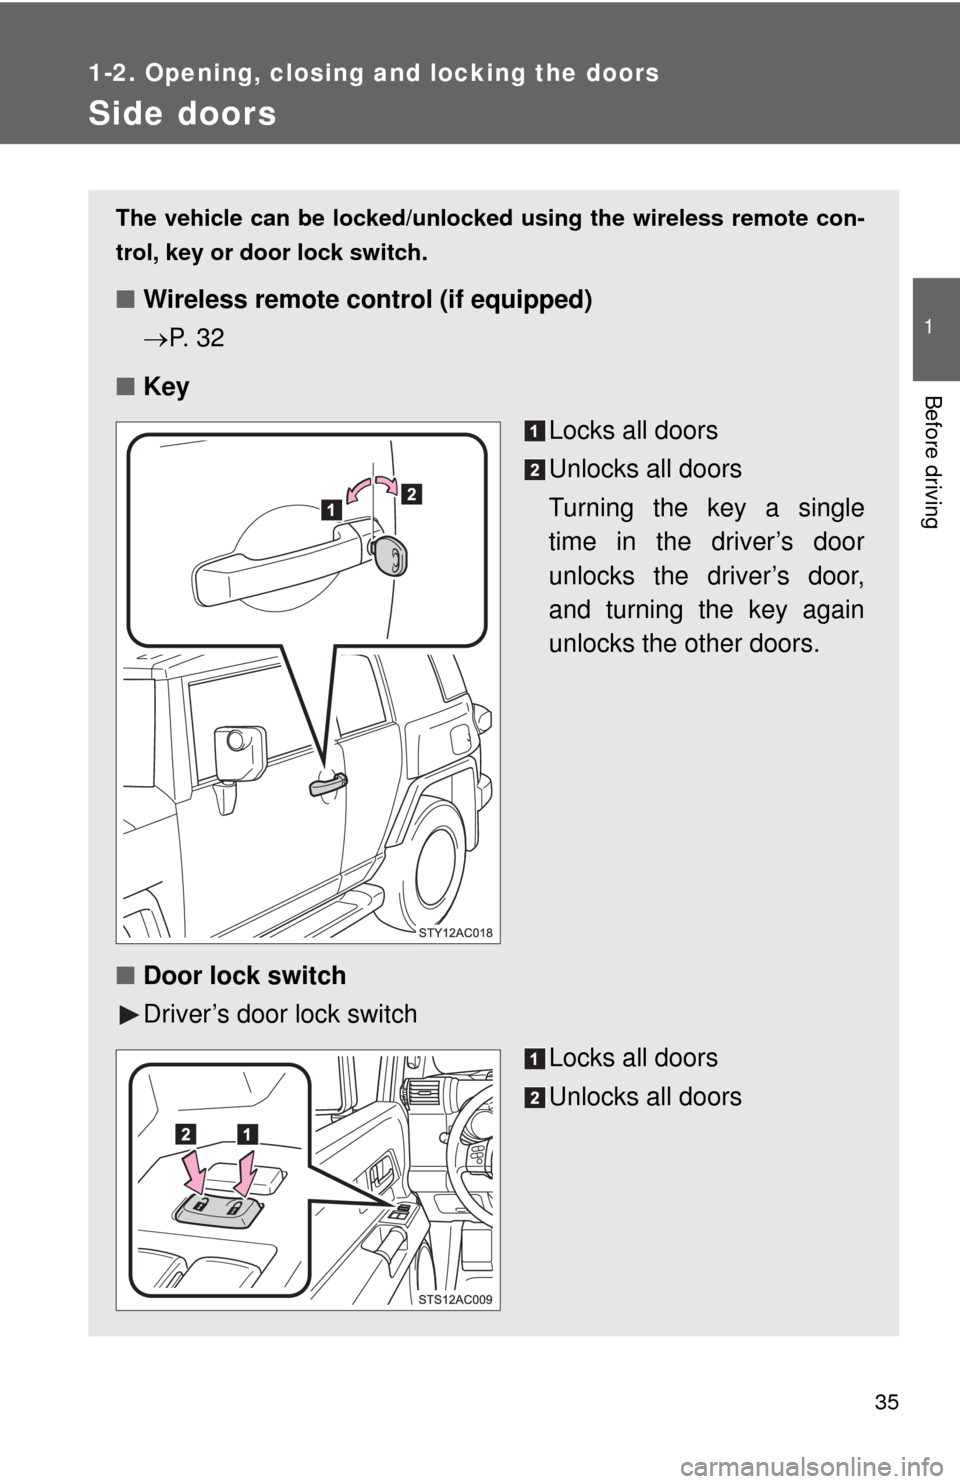 TOYOTA FJ CRUISER 2013 1.G Owners Guide 35
1
1-2. Opening, closing and locking the doors
Before driving
Side doors
The vehicle can be locked/unlocked using the wireless remote con-
trol, key or door lock switch.
■ Wireless remote control 